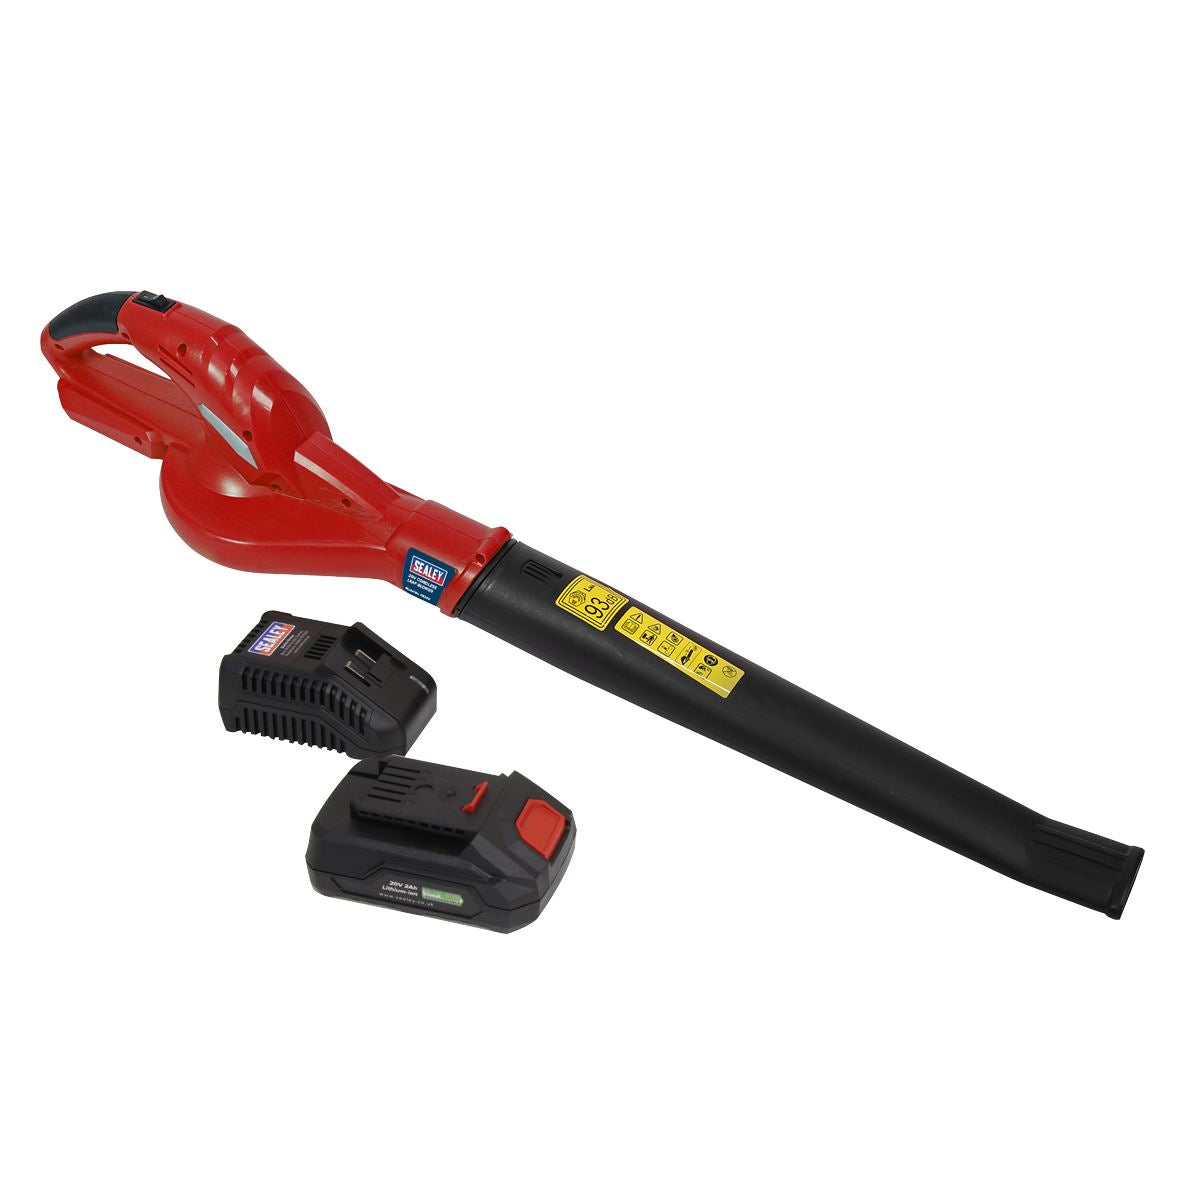 Sealey 20V Cordless Leaf Blower Kit 2Ah Battery and Charger